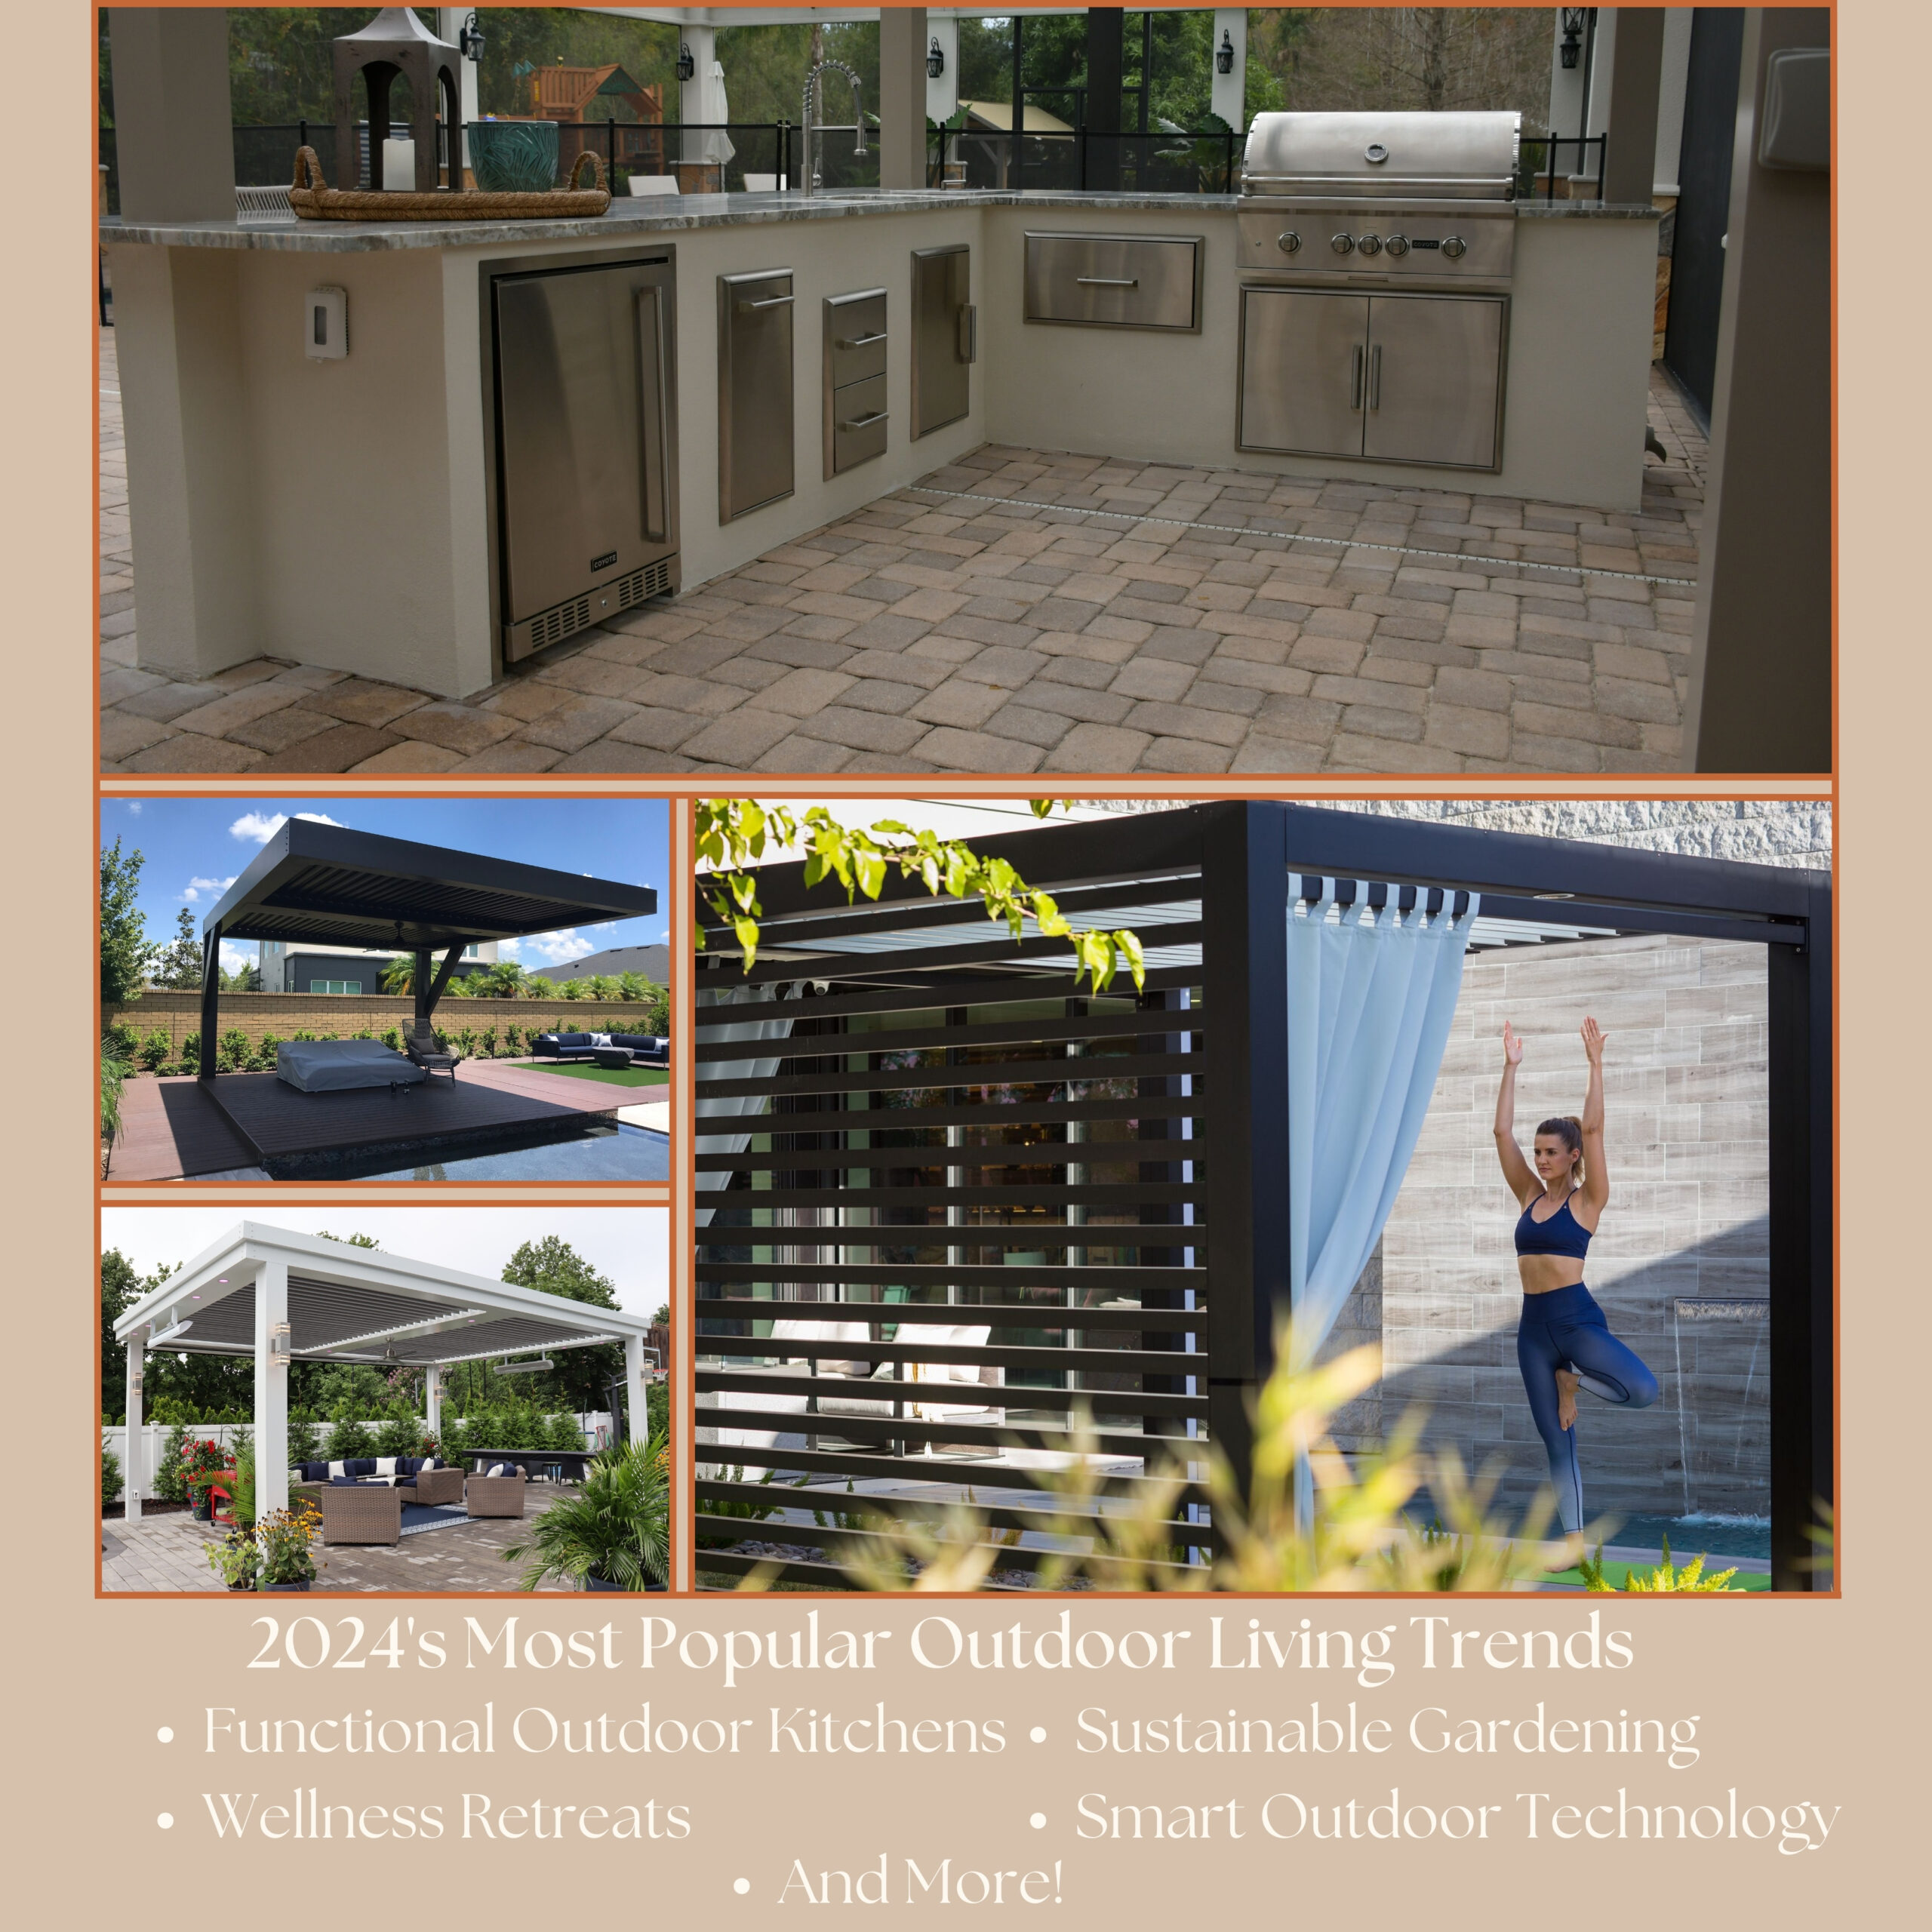 Featured image for “2024’s Most Popular Outdoor Living Trends”